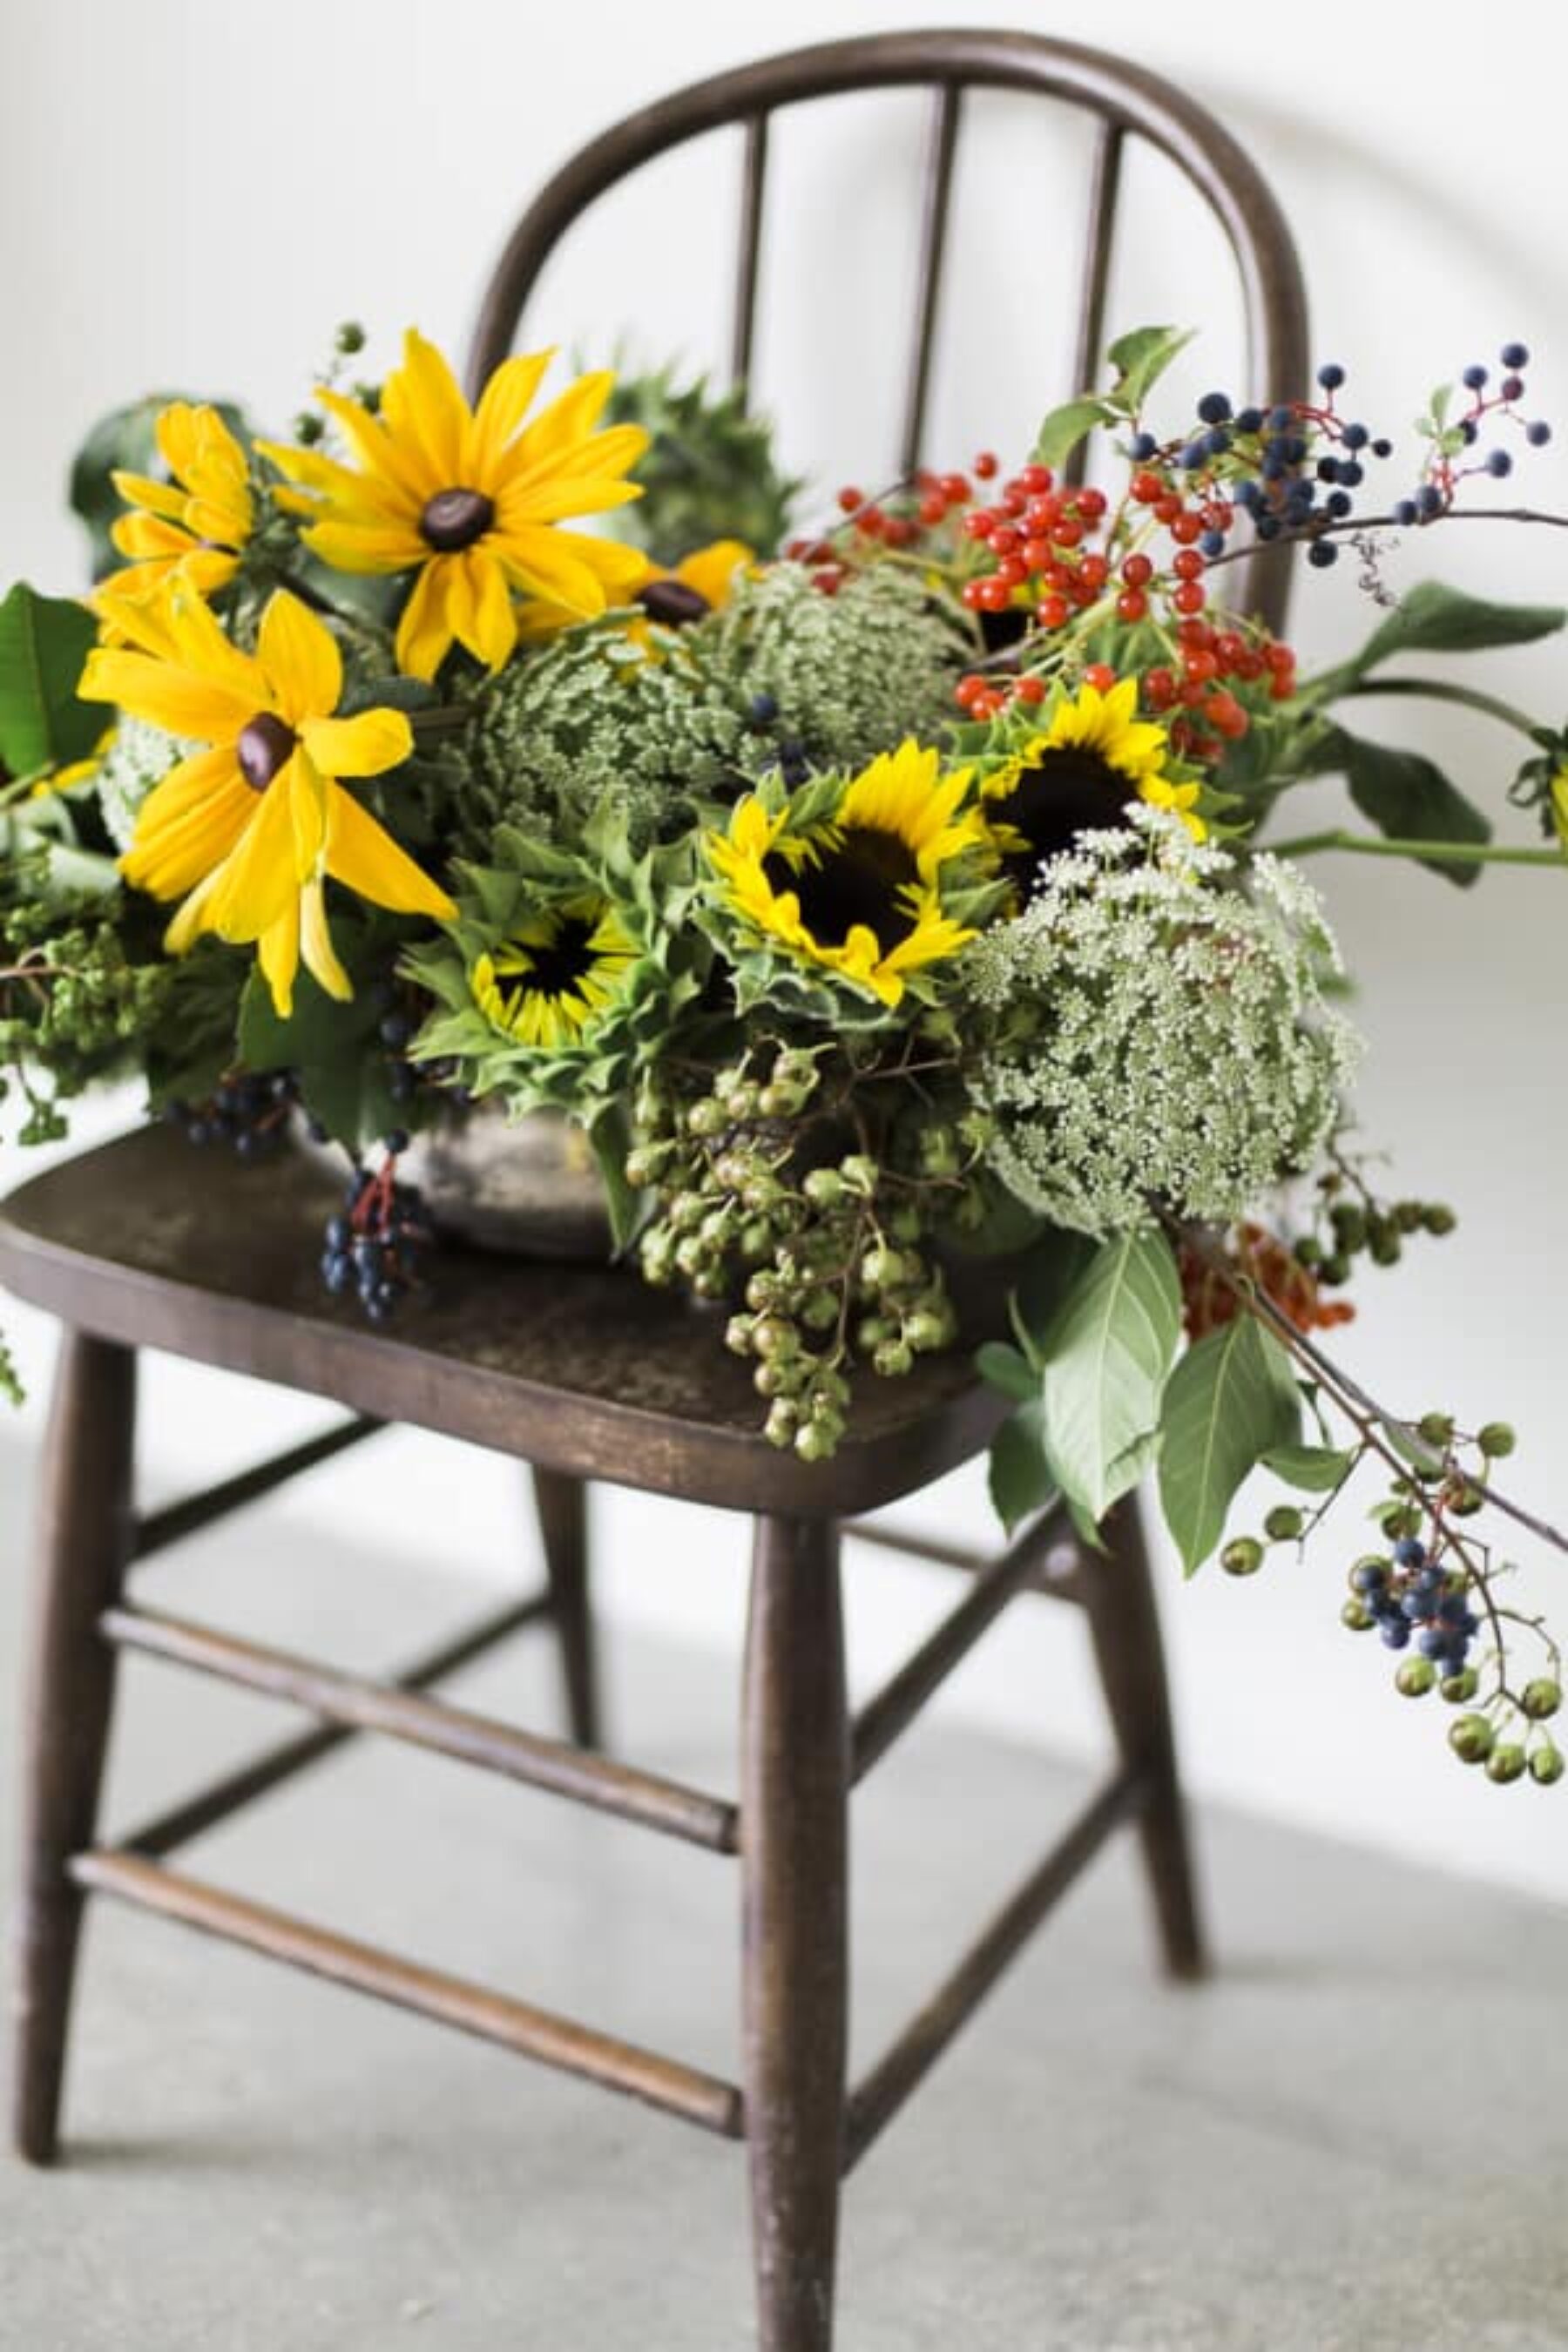 Sunflowers and bent wood chair